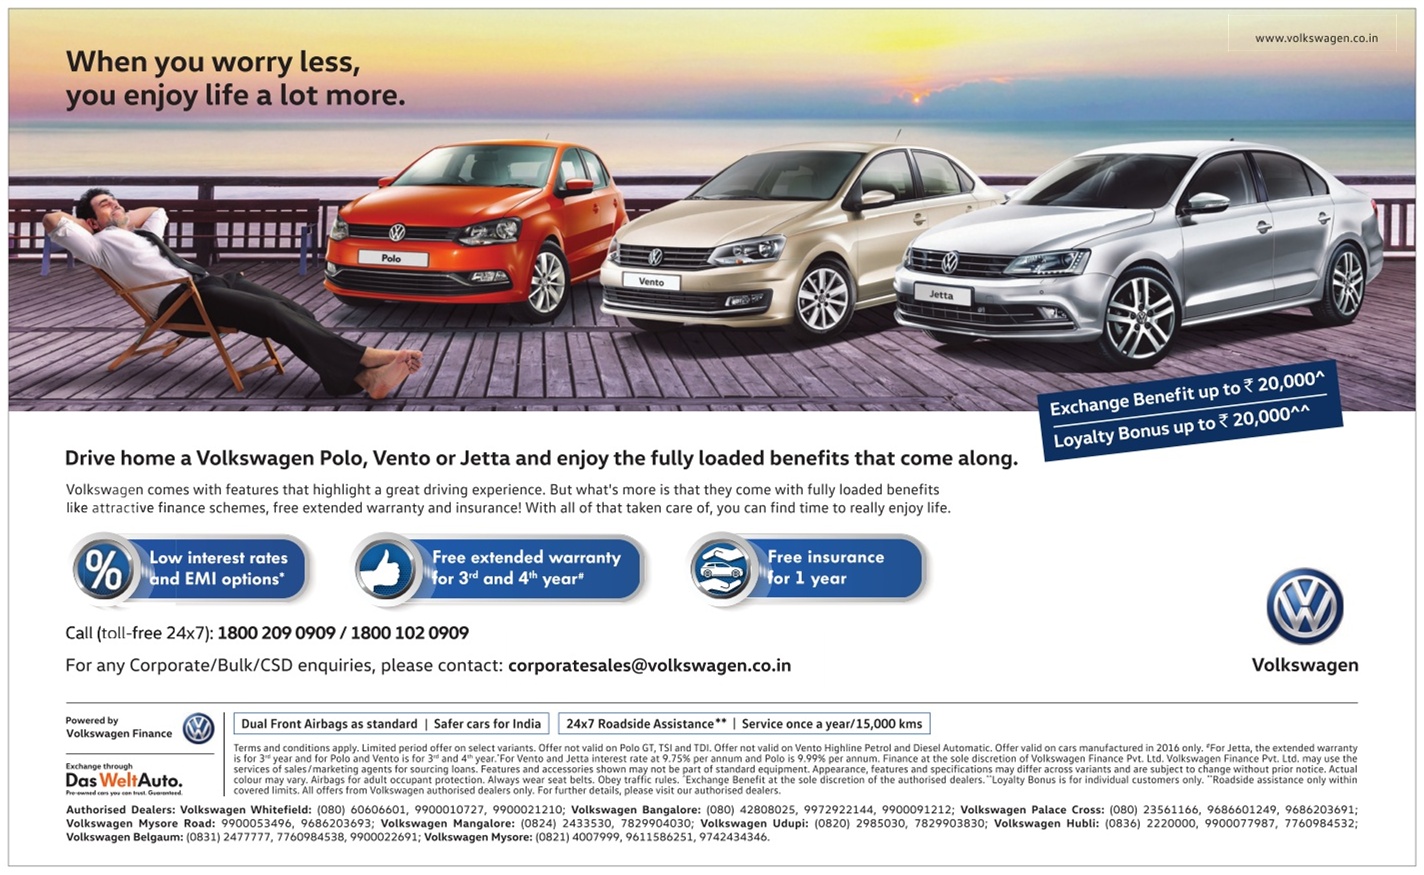 Amazing discount offers on Volkswagen Polo, Vento and Jetta